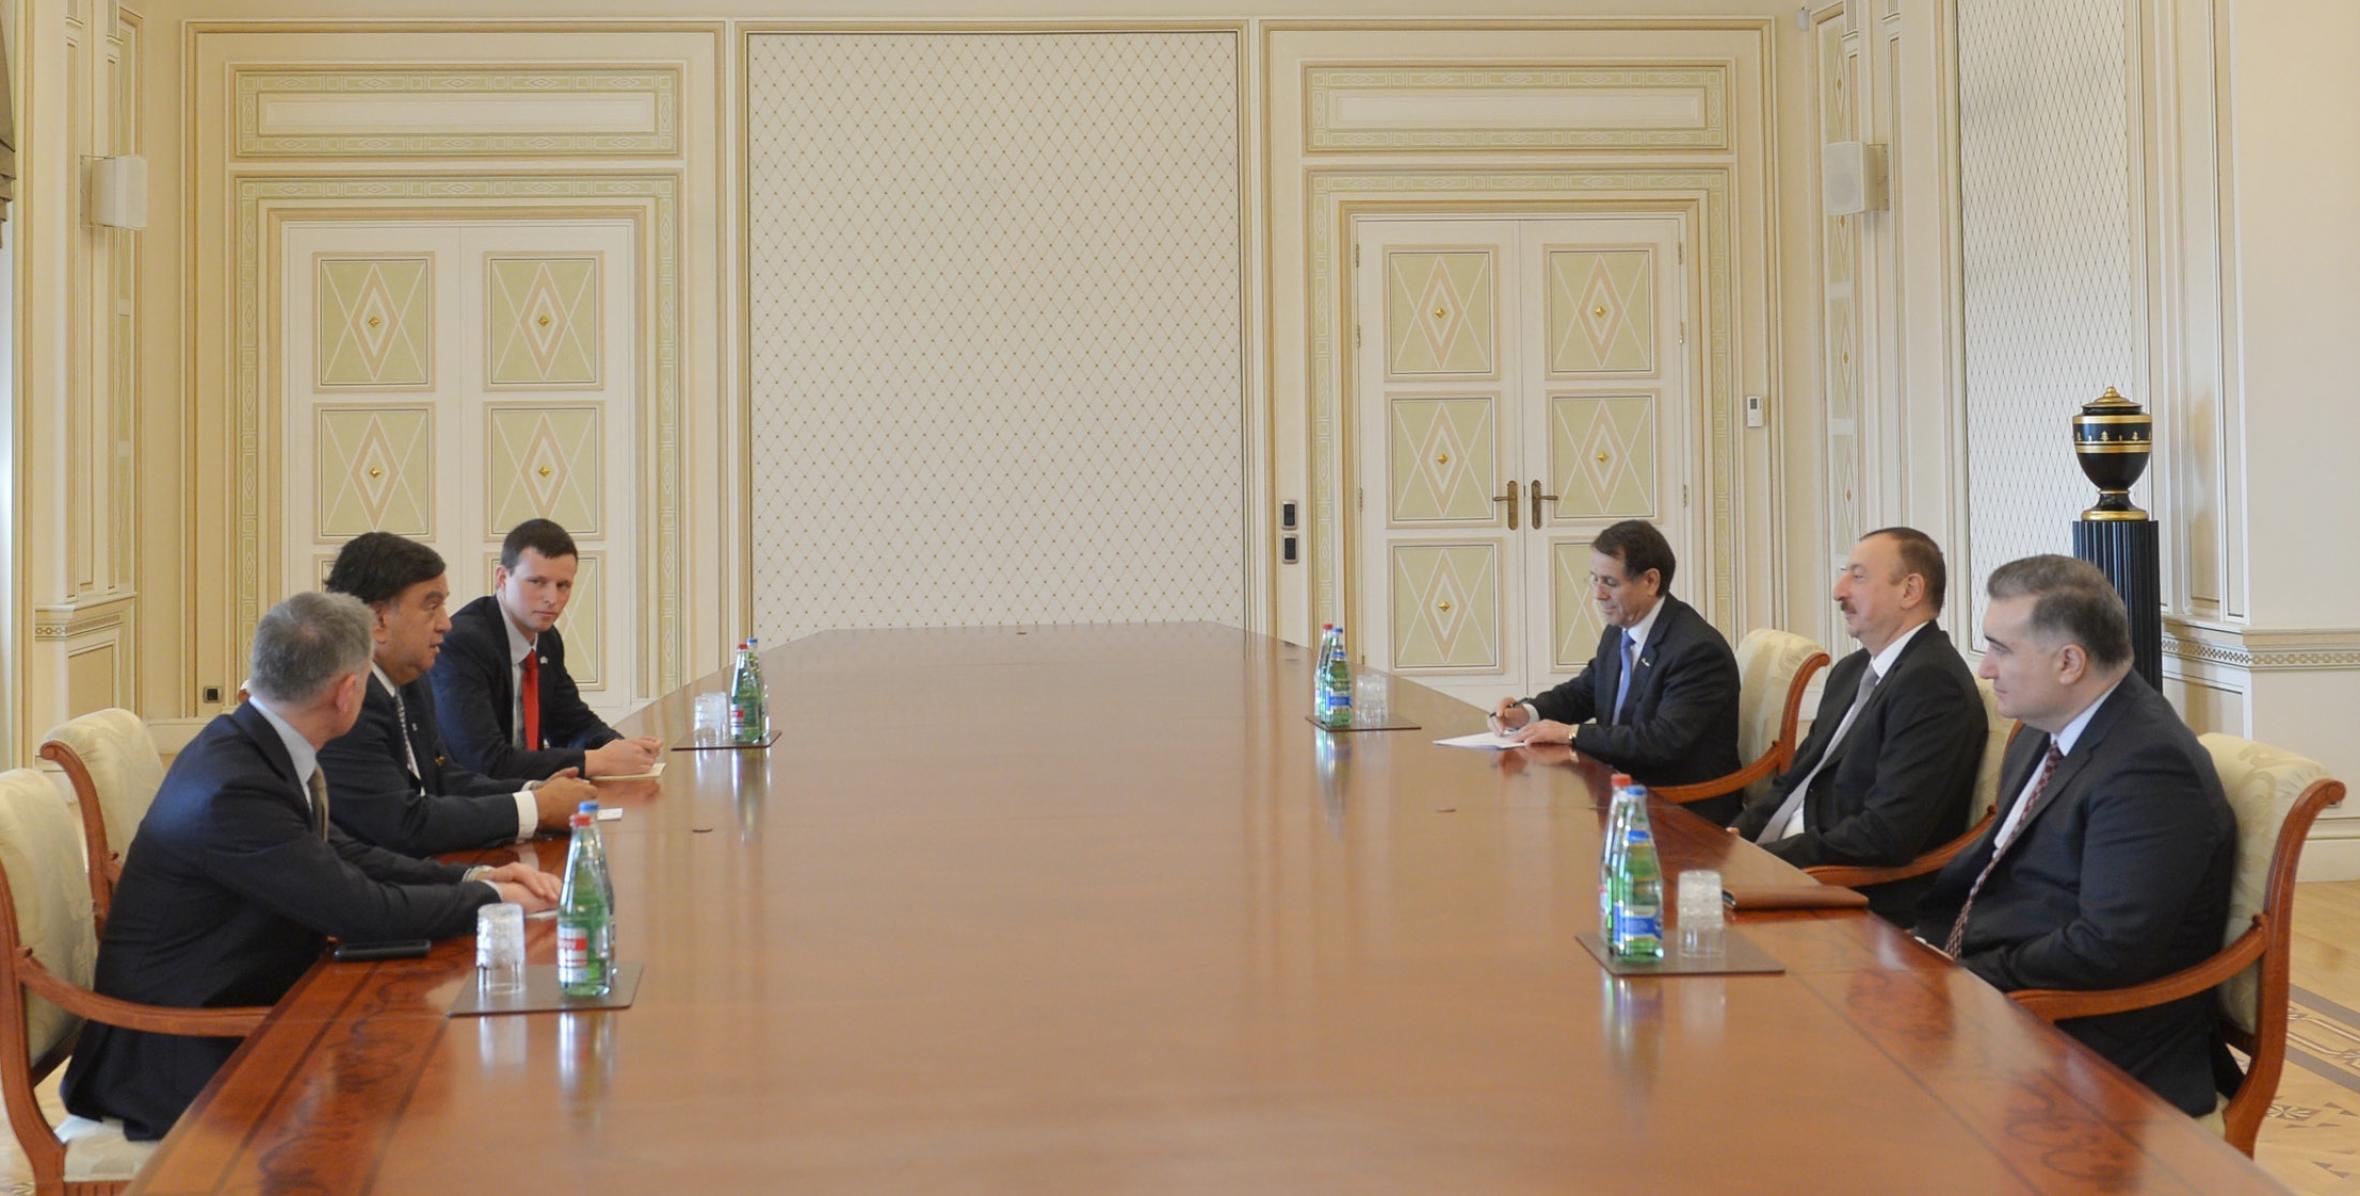 Ilham Aliyev received a delegation led by the chairman of Global Political Strategies APCO and former governor of New Mexico, USA